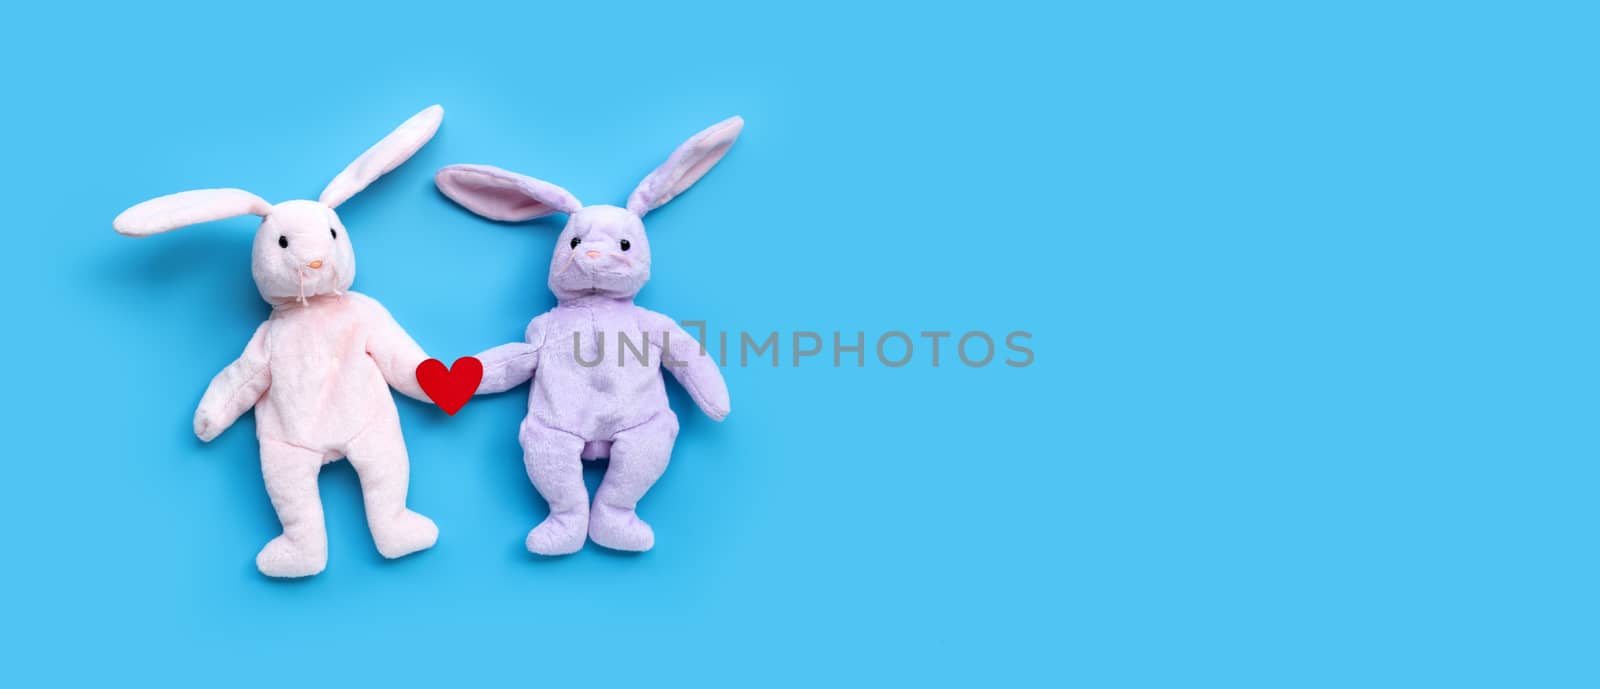 Rabbit toy couple on blue background. by Bowonpat